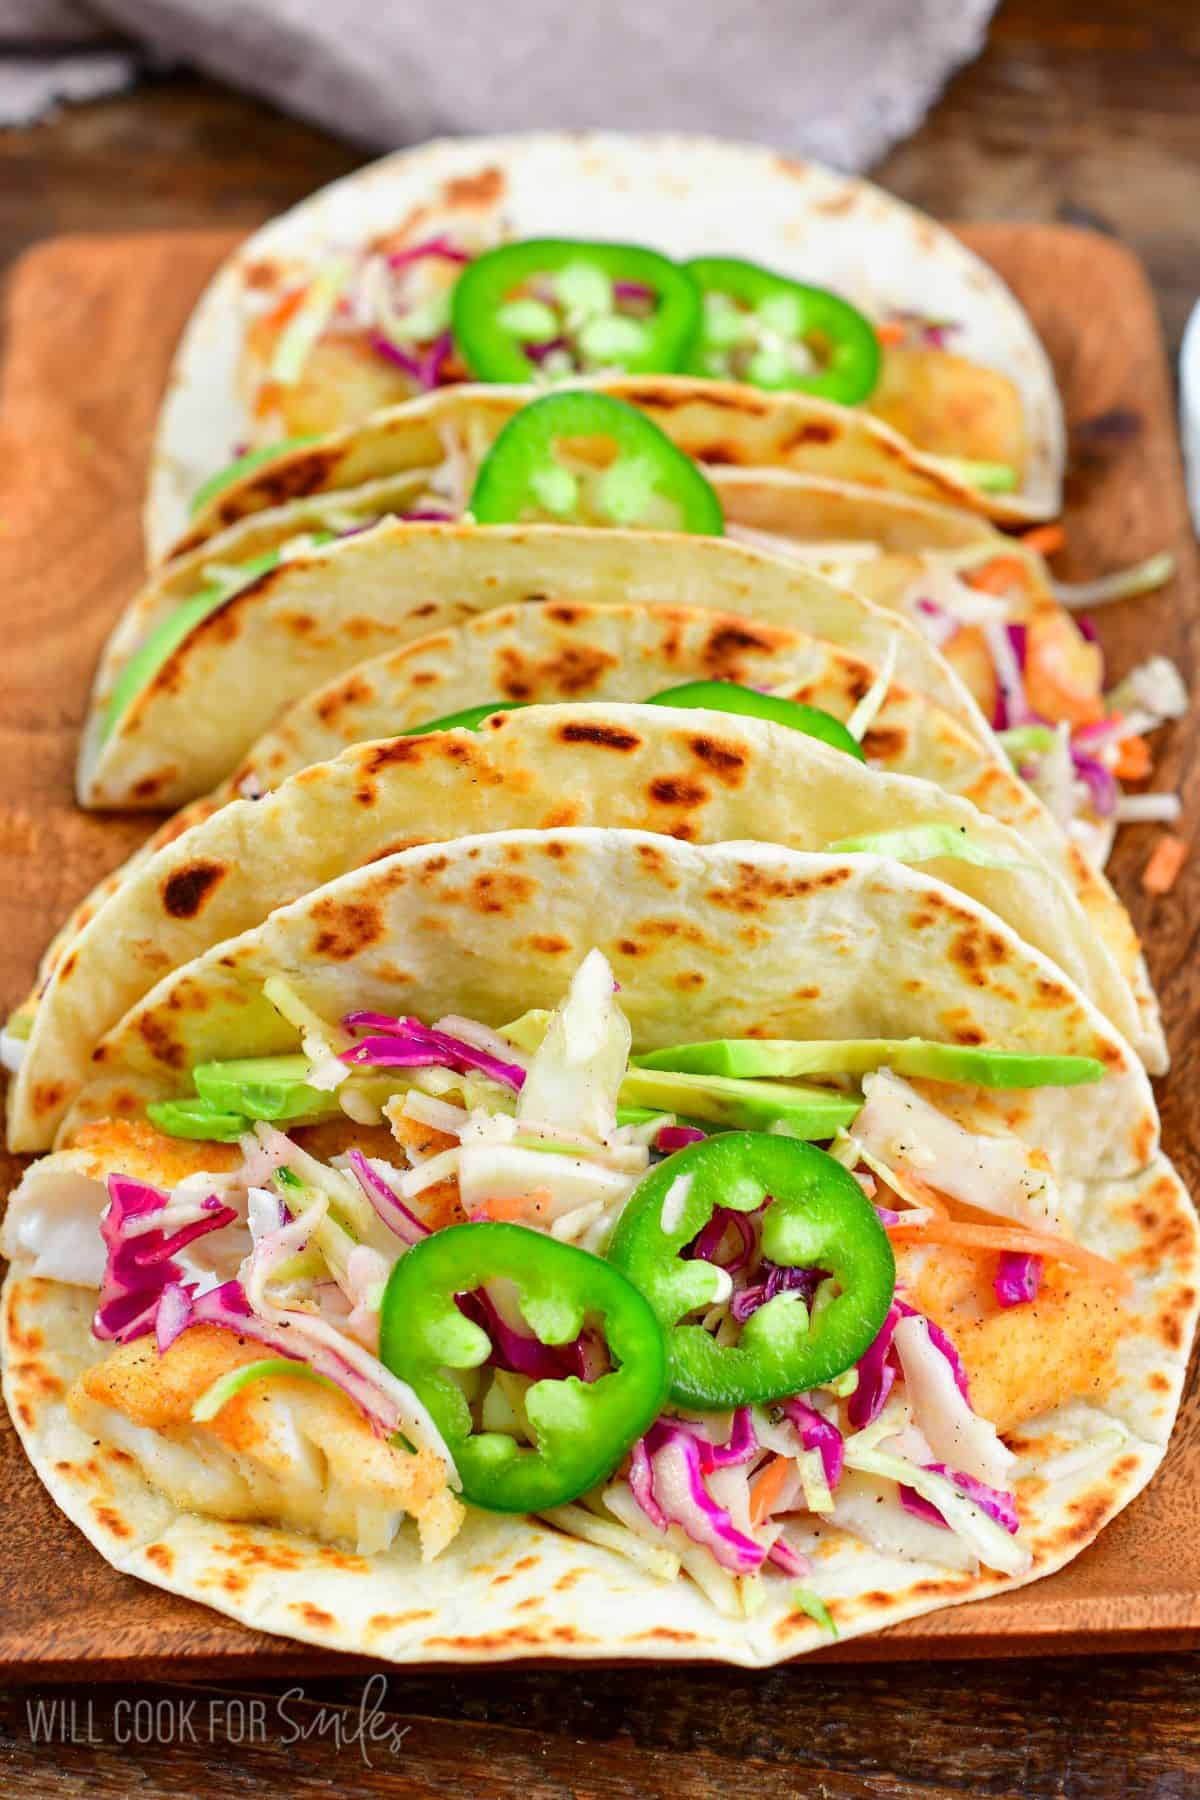 Four fish tacos lined up on a wood tray with cabbage, avocado, and jalapenos as topping.